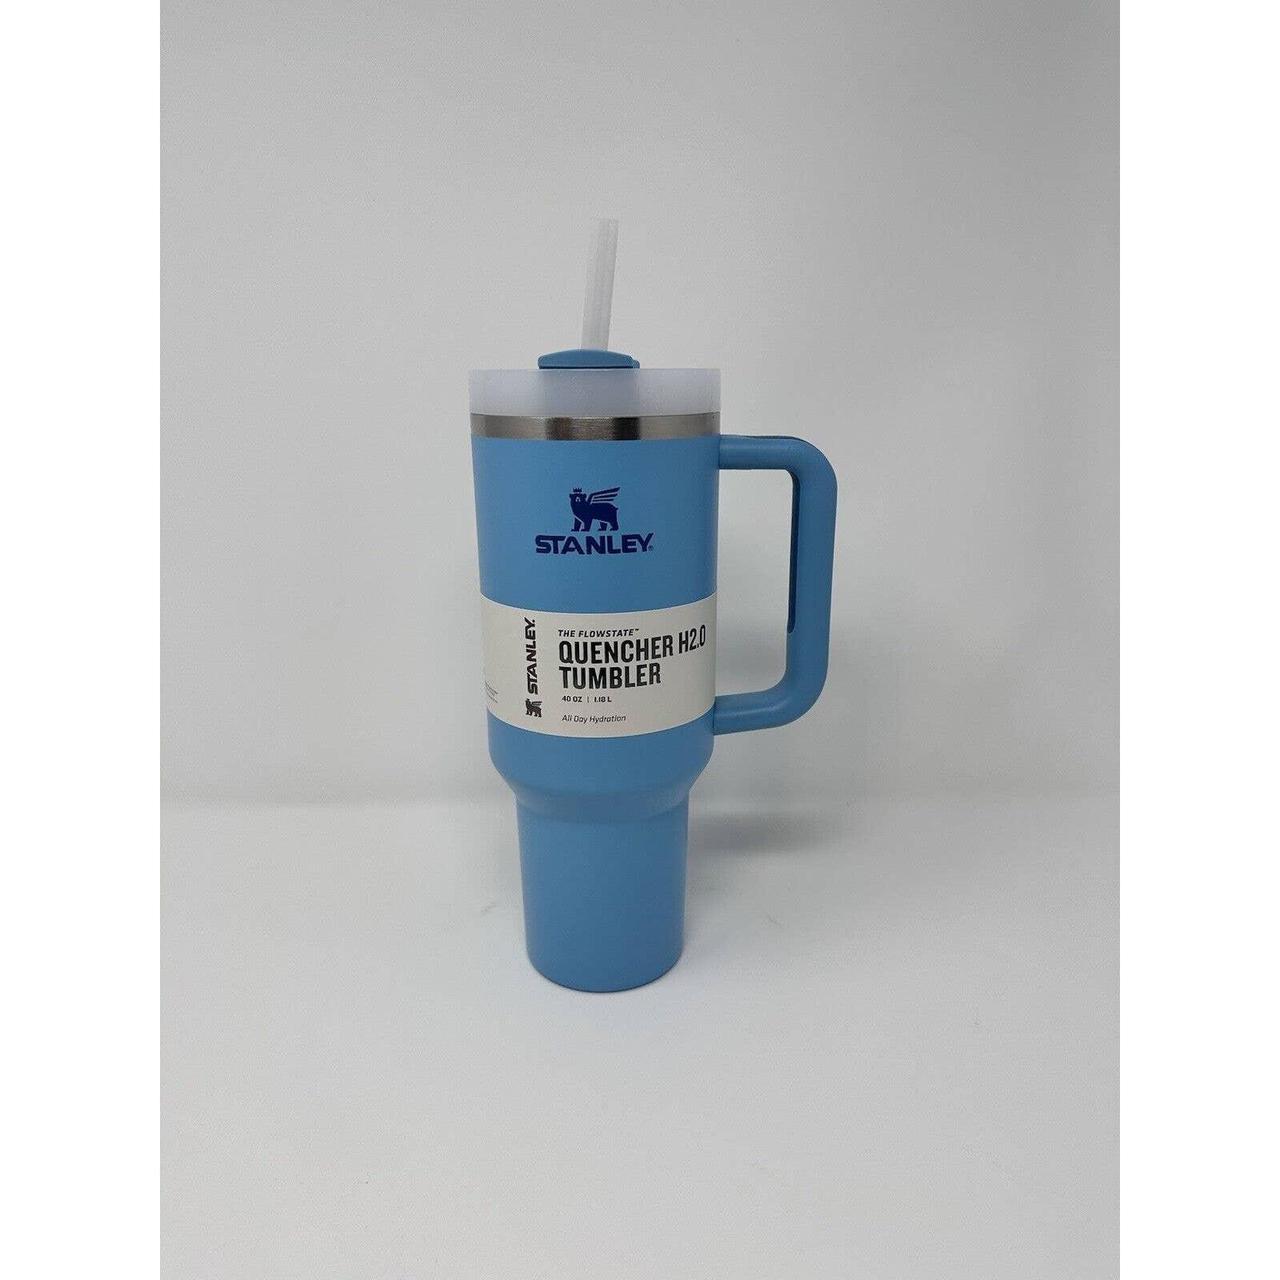 STANLEY THE QUENCHER H2.0 FLOWSTATE TUMBLER | 40 OZ POOL BLUE